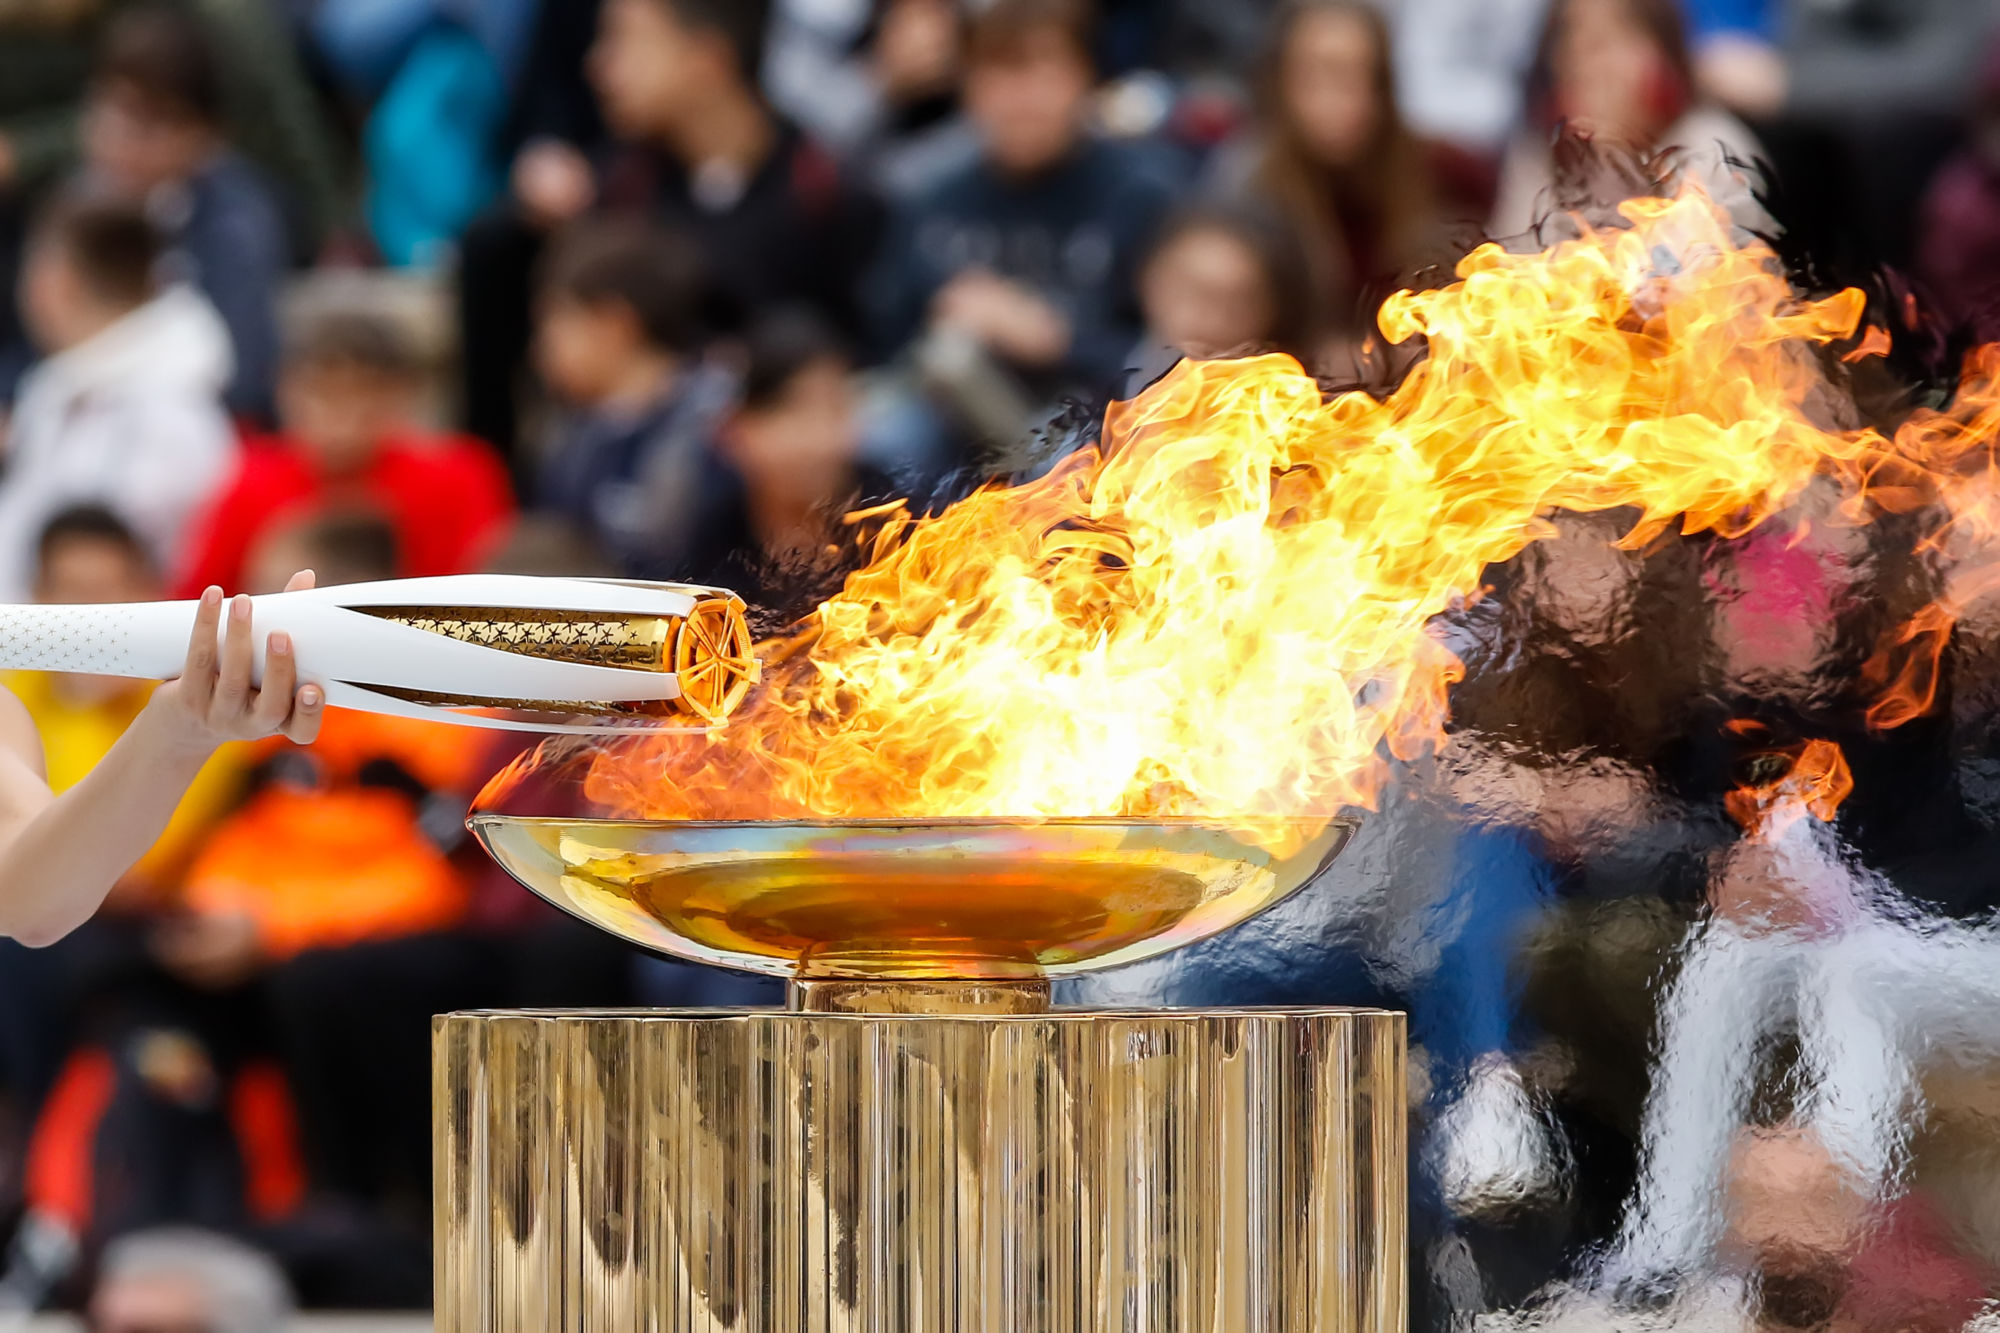 Olympic Flame: Lighting the torch with the flame, The Olympic flame handover ceremony, Symbolic sports tradition. 2000x1340 HD Wallpaper.